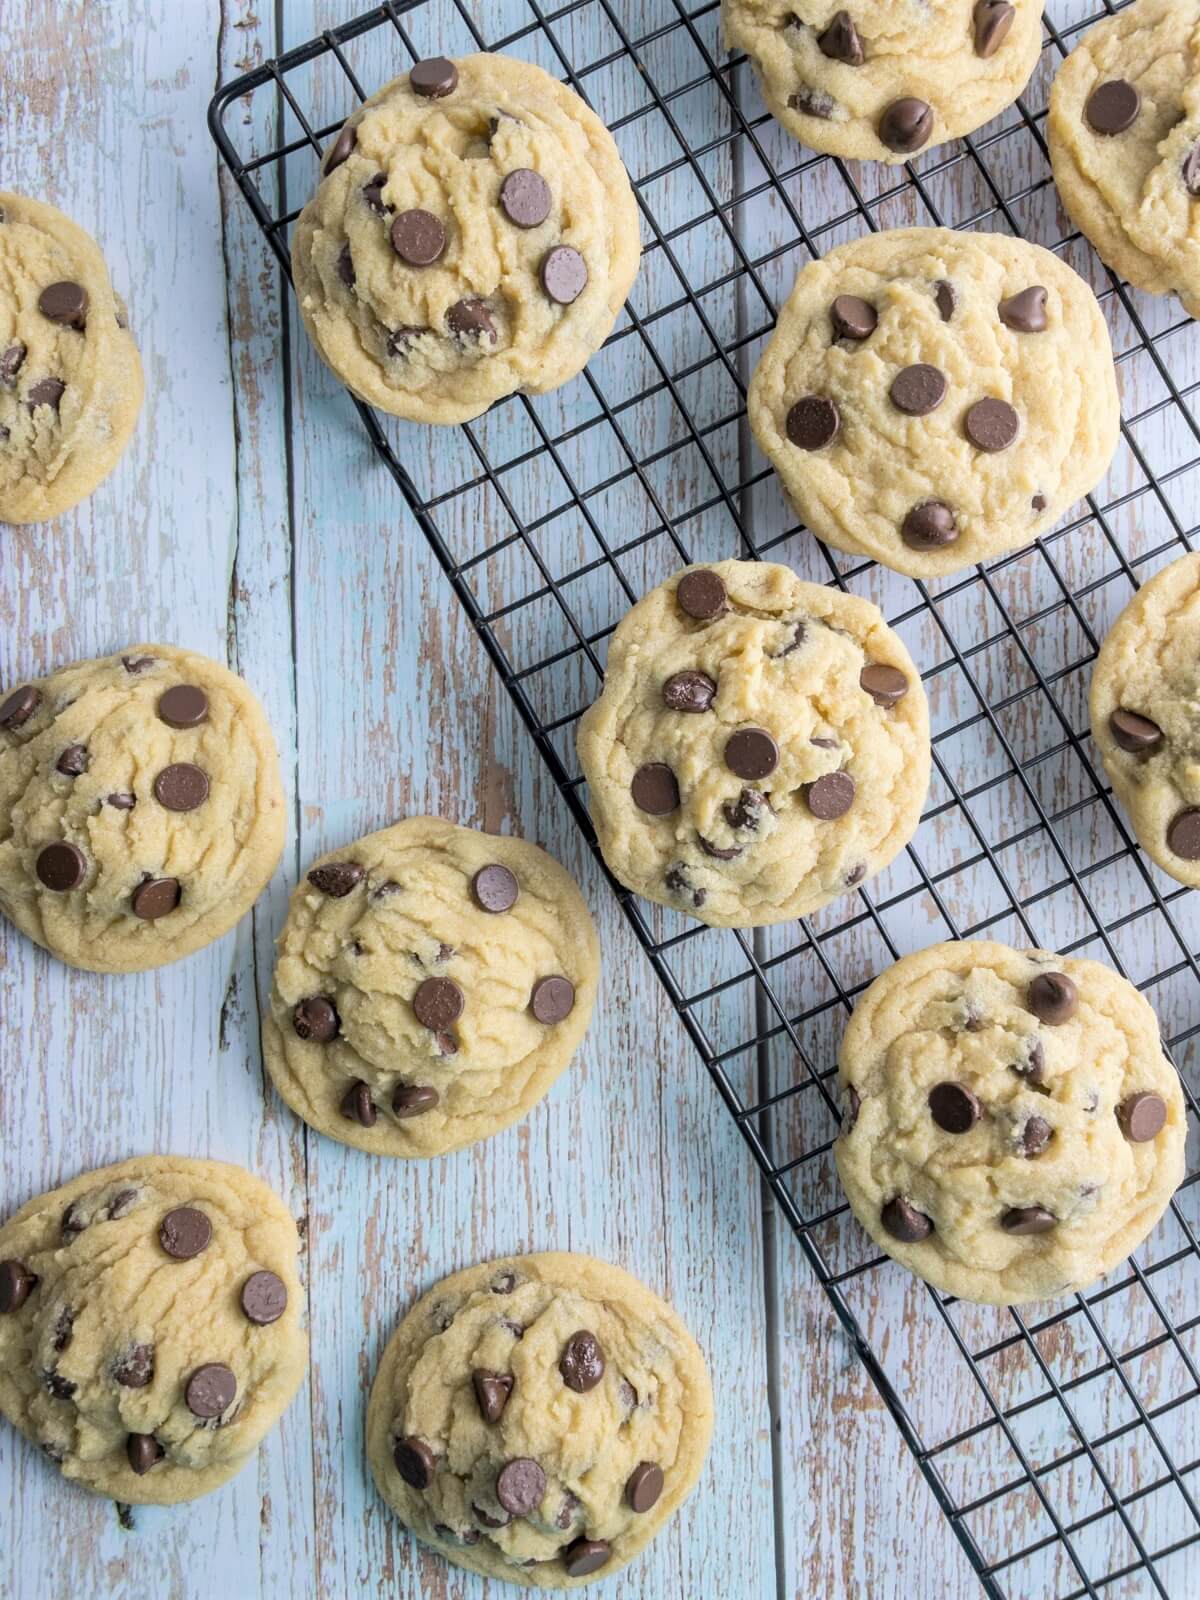 https://amycakesbakes.com/wp-content/uploads/2022/06/Chewy-Bakery-Style-Chocolate-Chip-Cookies.jpg